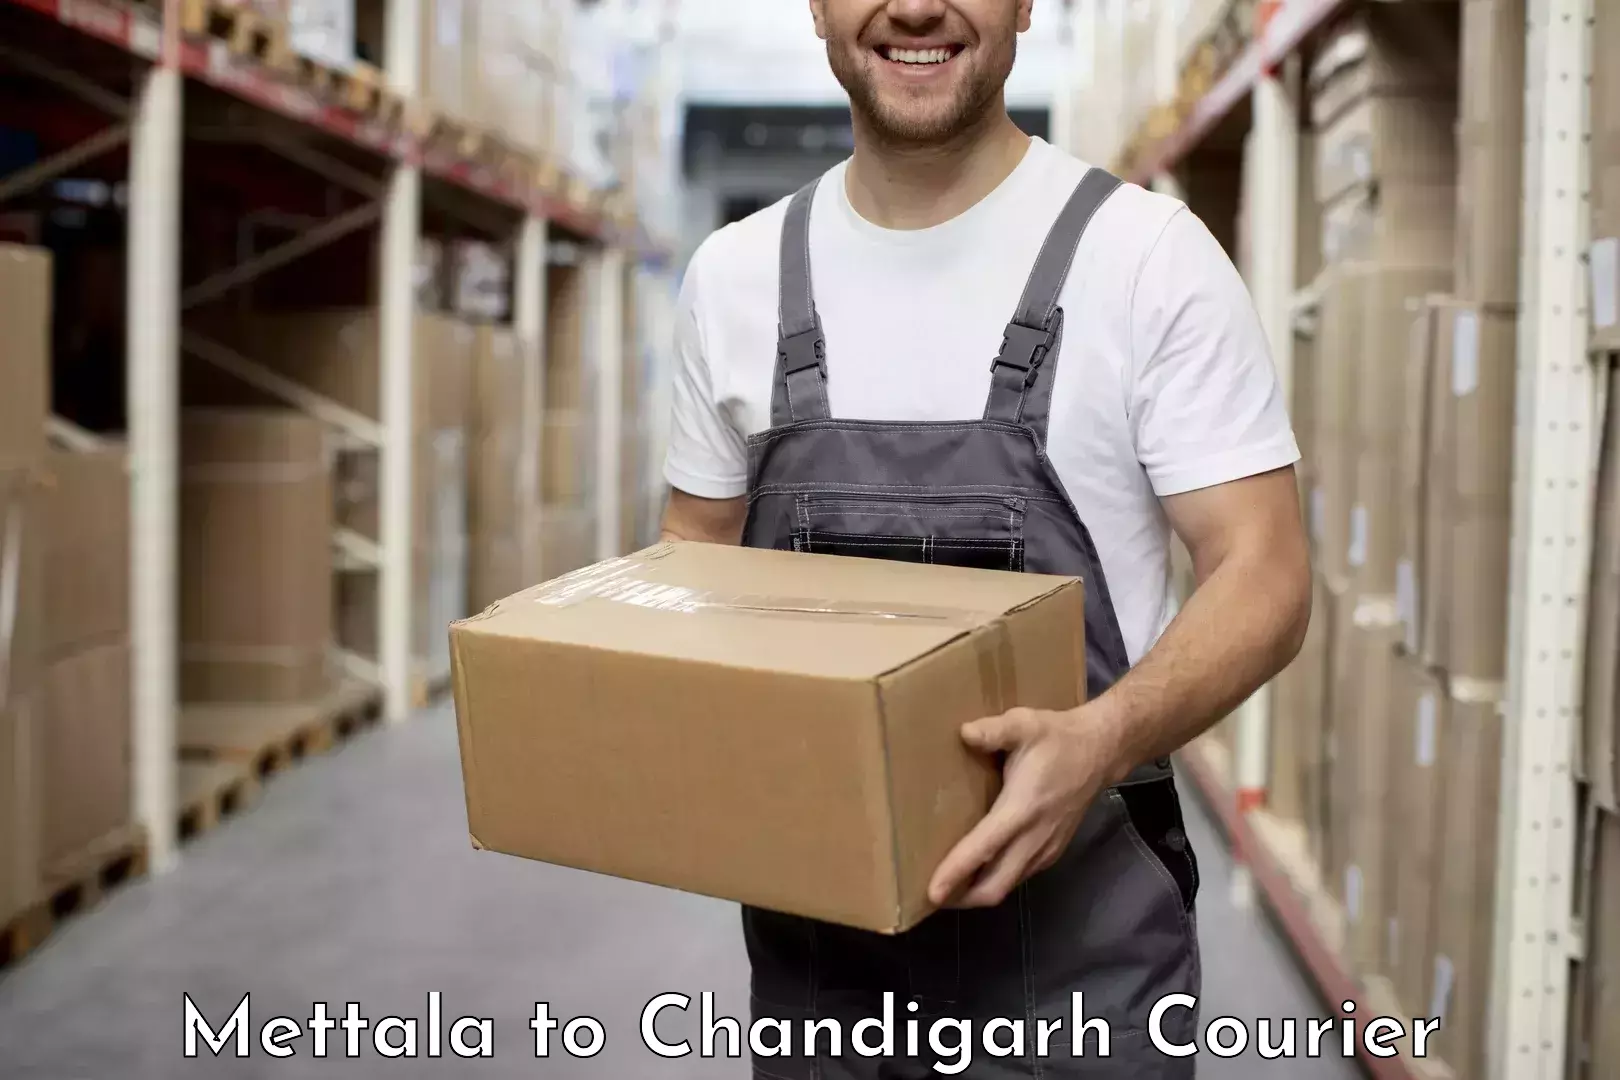 State-of-the-art courier technology Mettala to Chandigarh